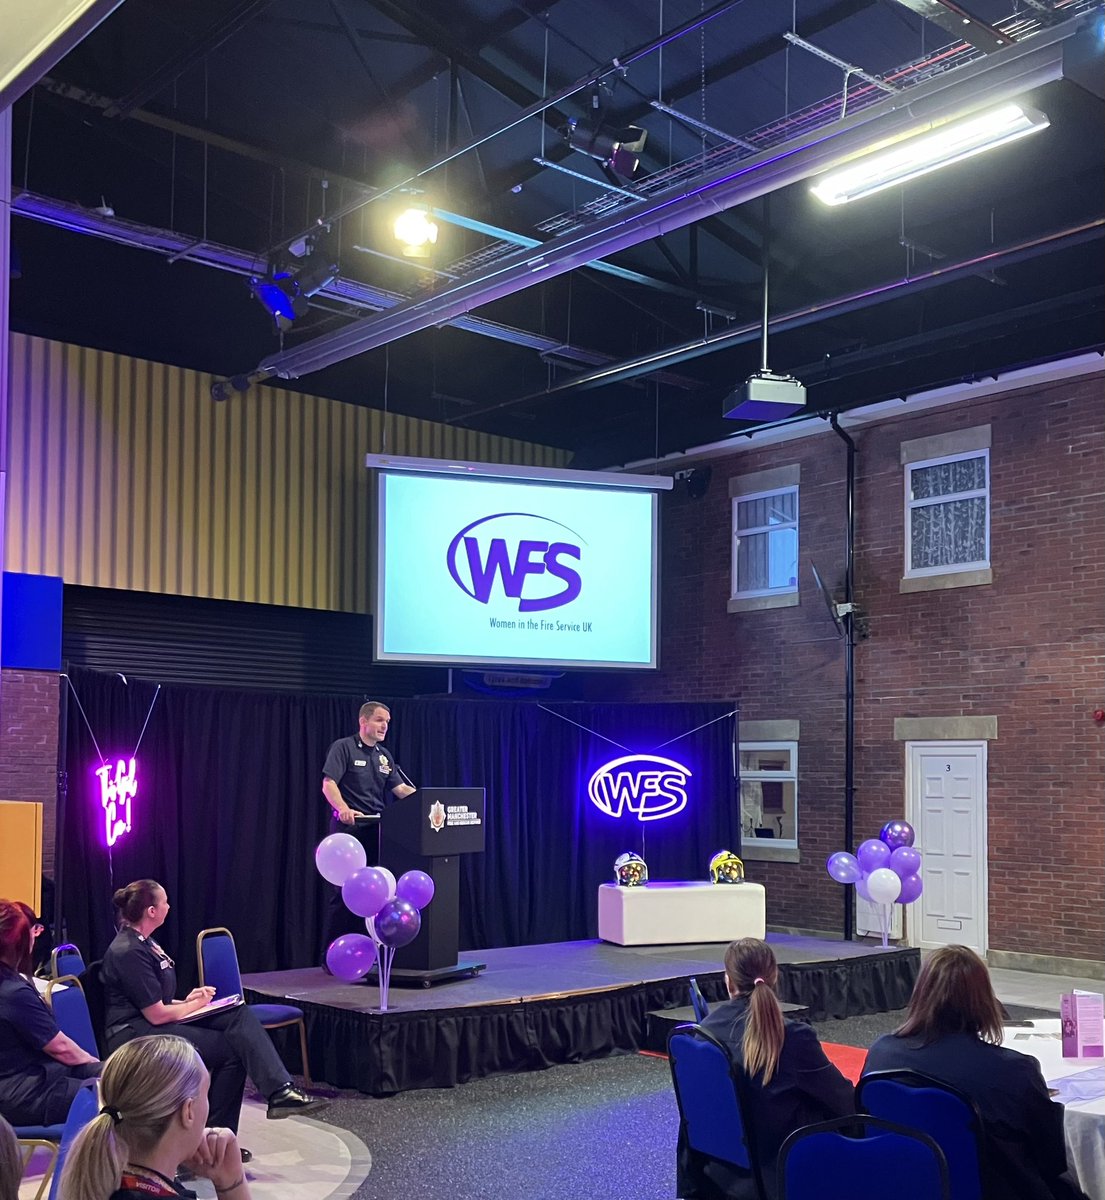 Powerful and personal opening of the WFS Greater Manchester event today @Suzziesue595 @manchesterfire @CFODaveRussel @SunitaGamblin #greatertogether